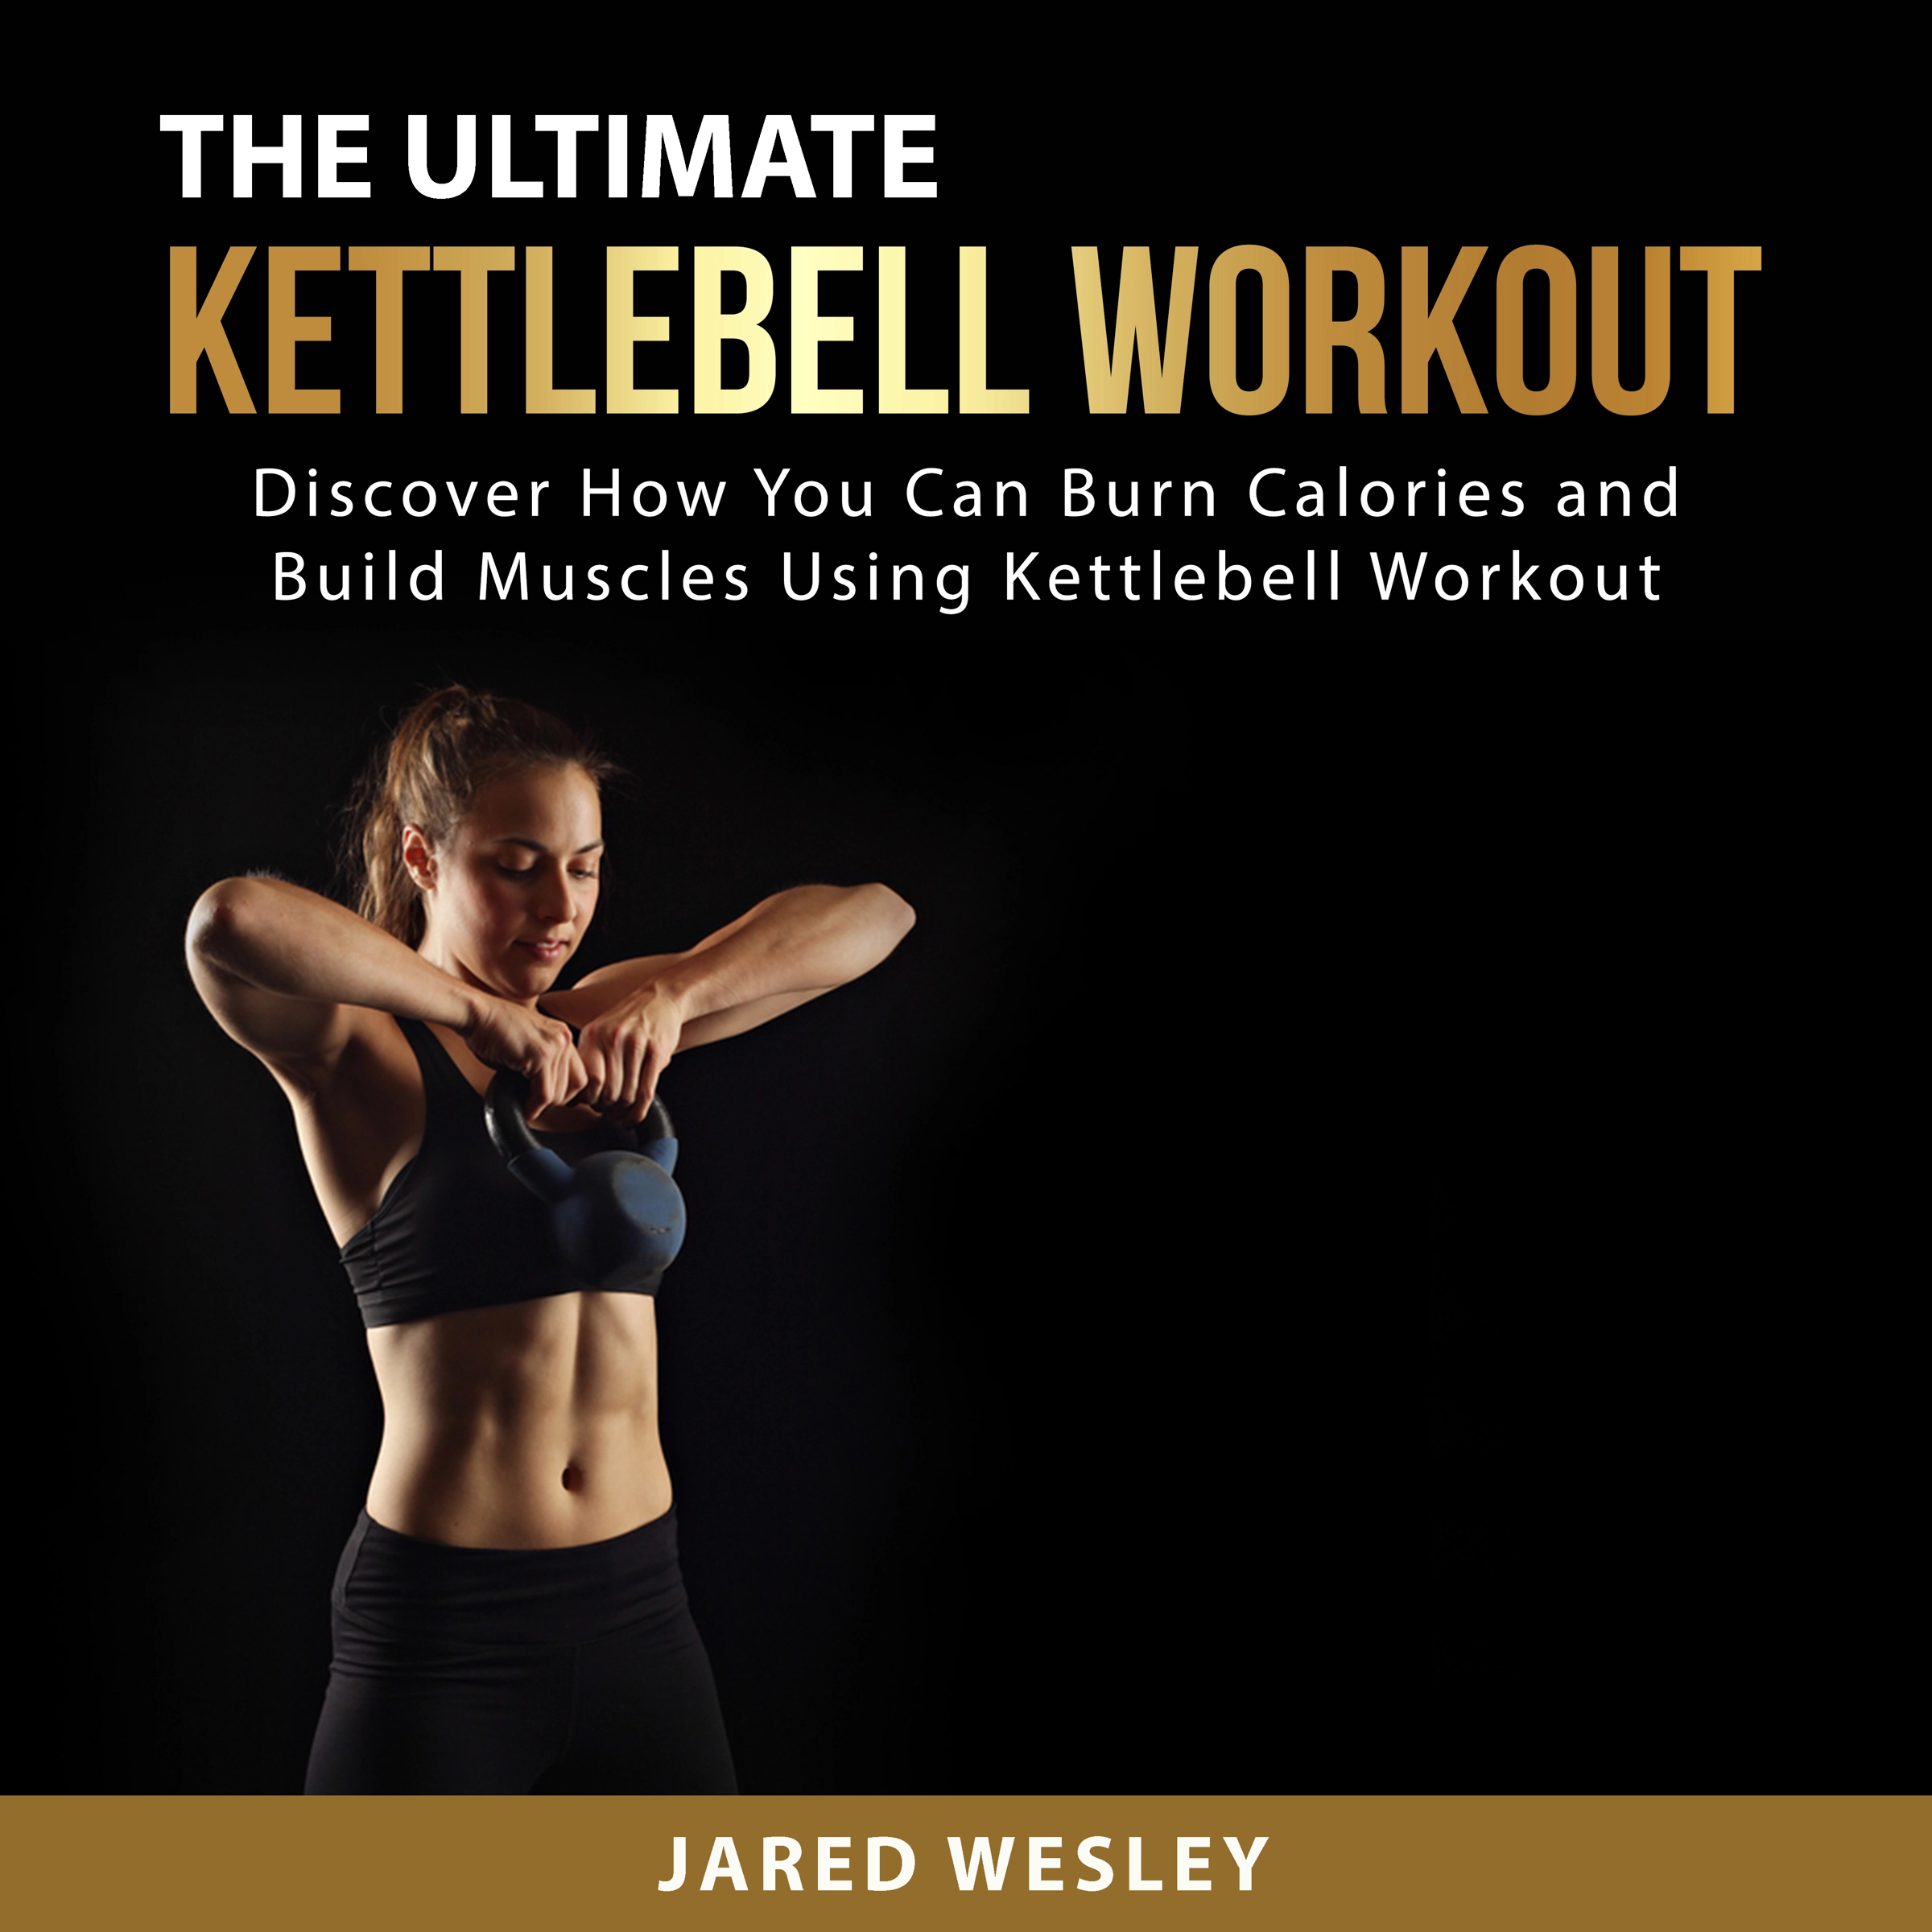 The Ultimate Kettlebell Workout Audiobook by Jared Wesley